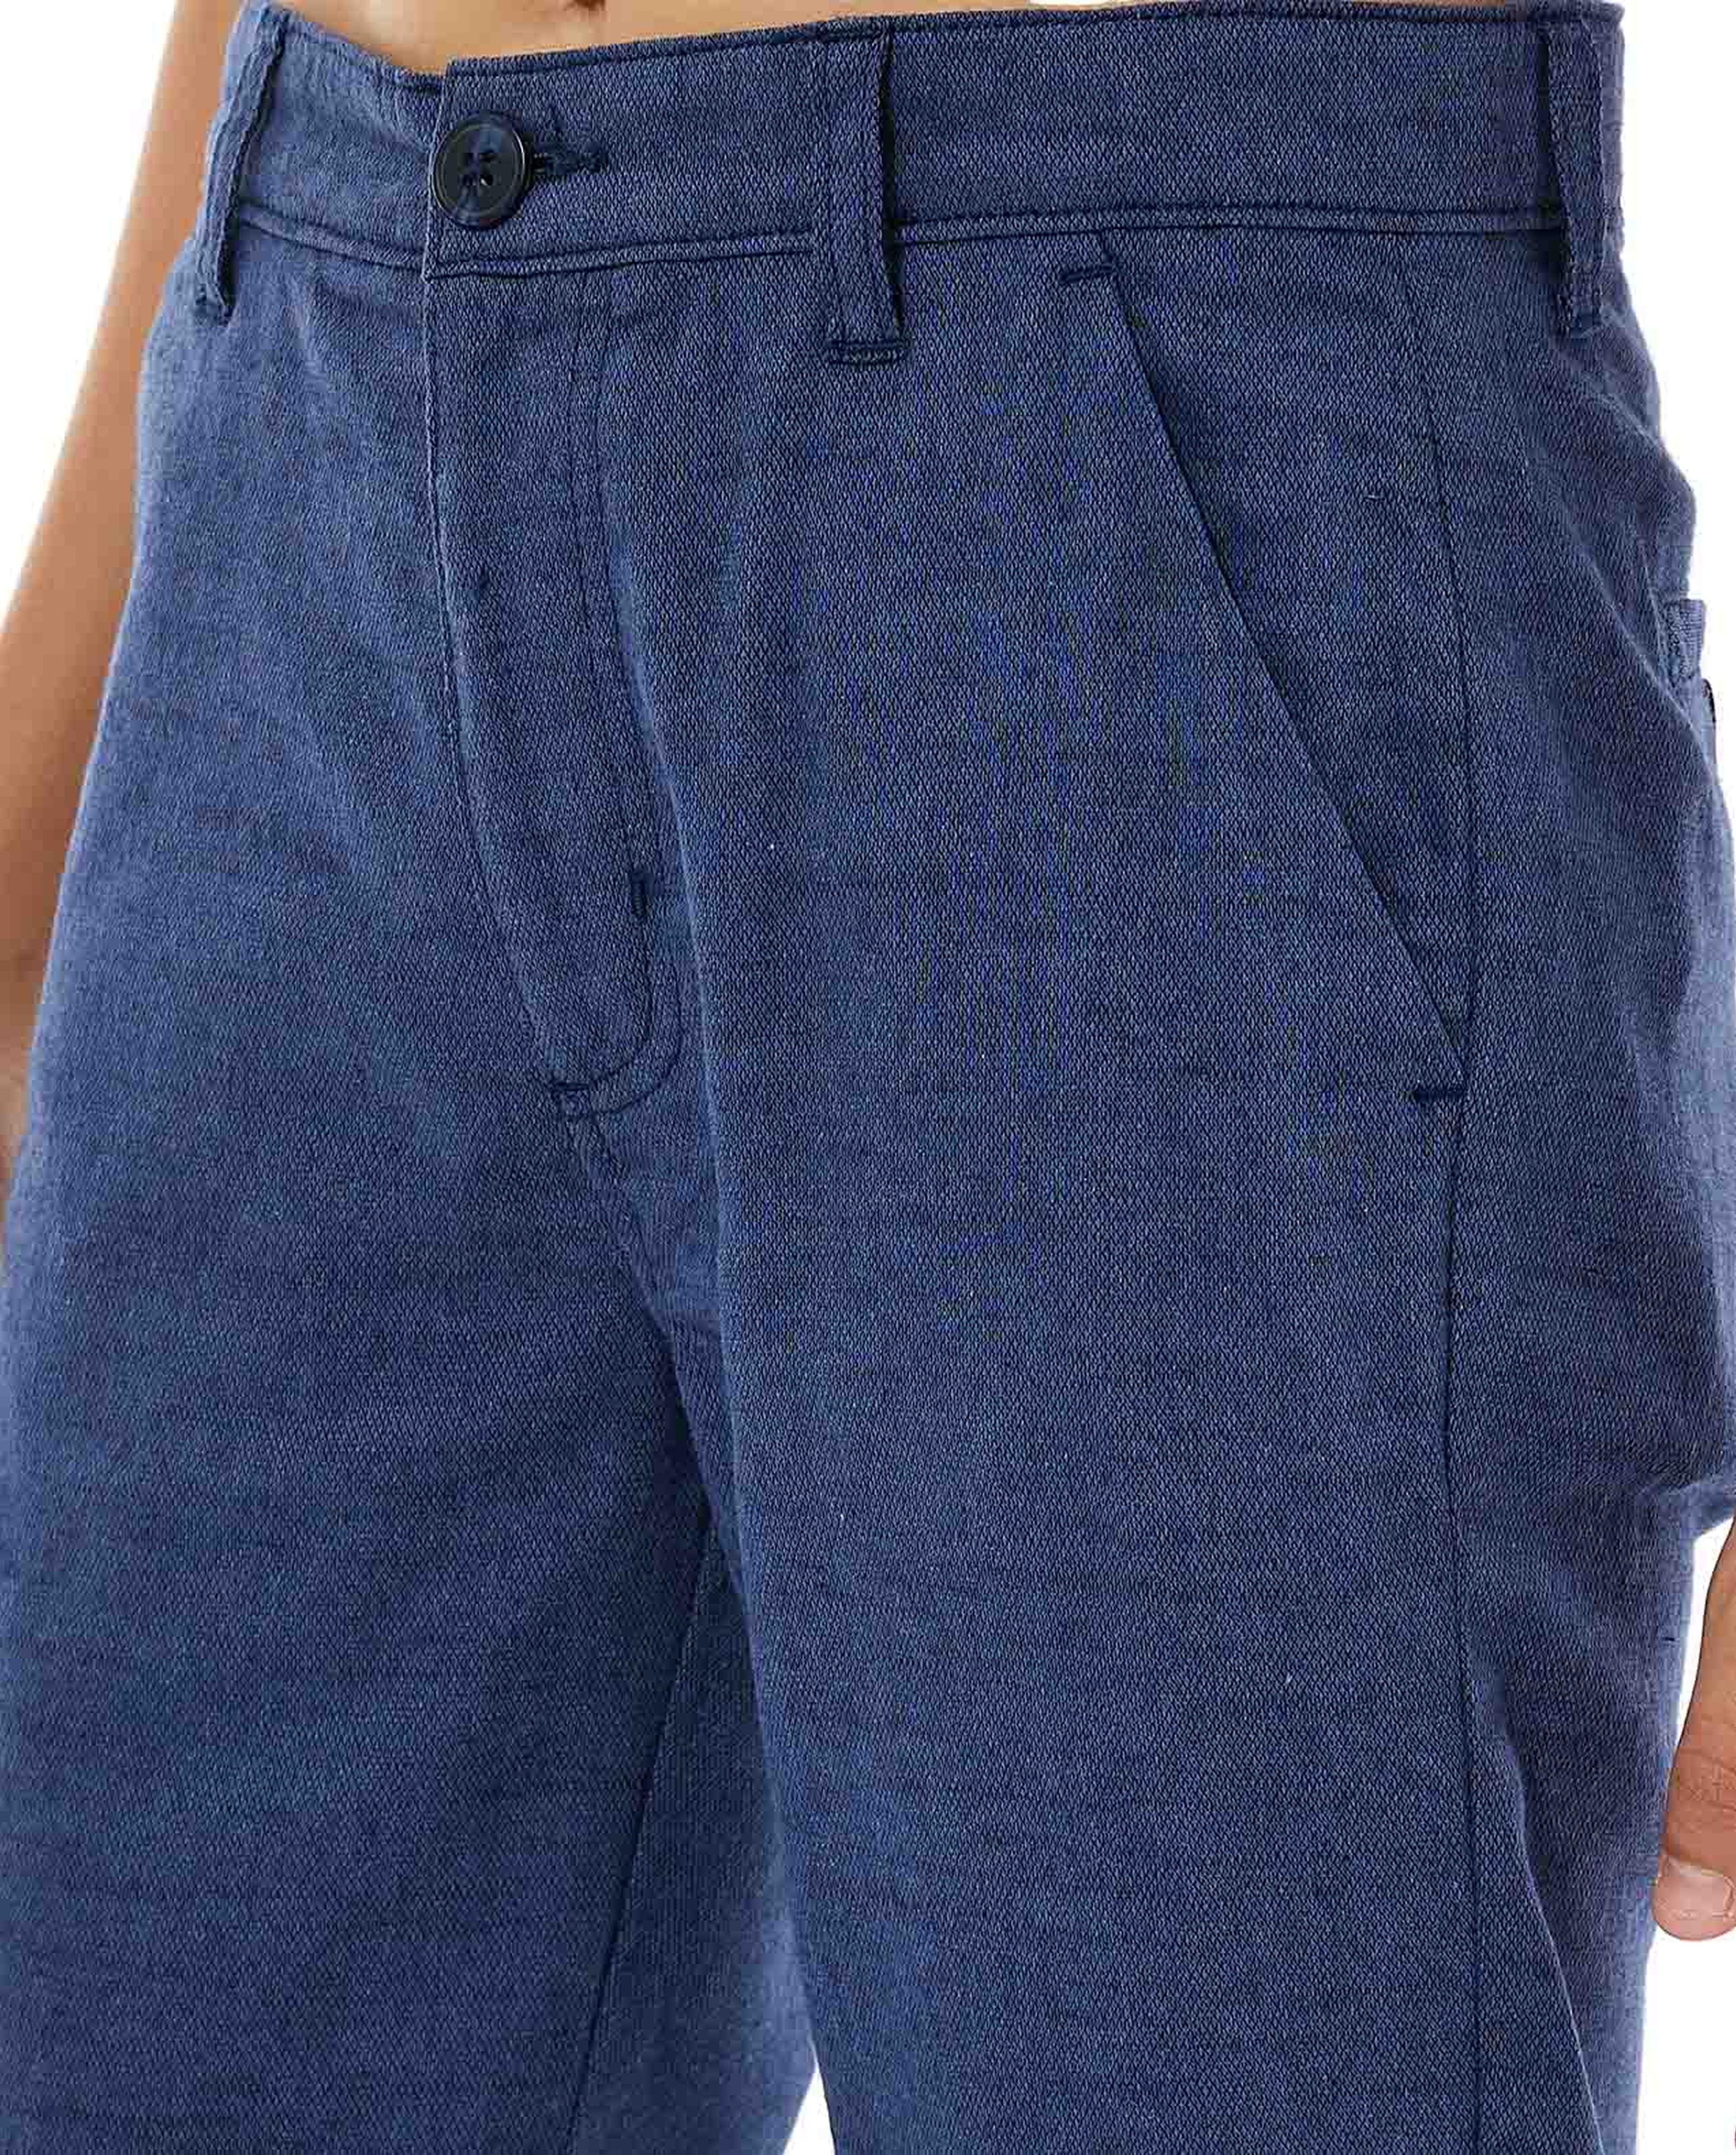 Woven Pants with Button Closure